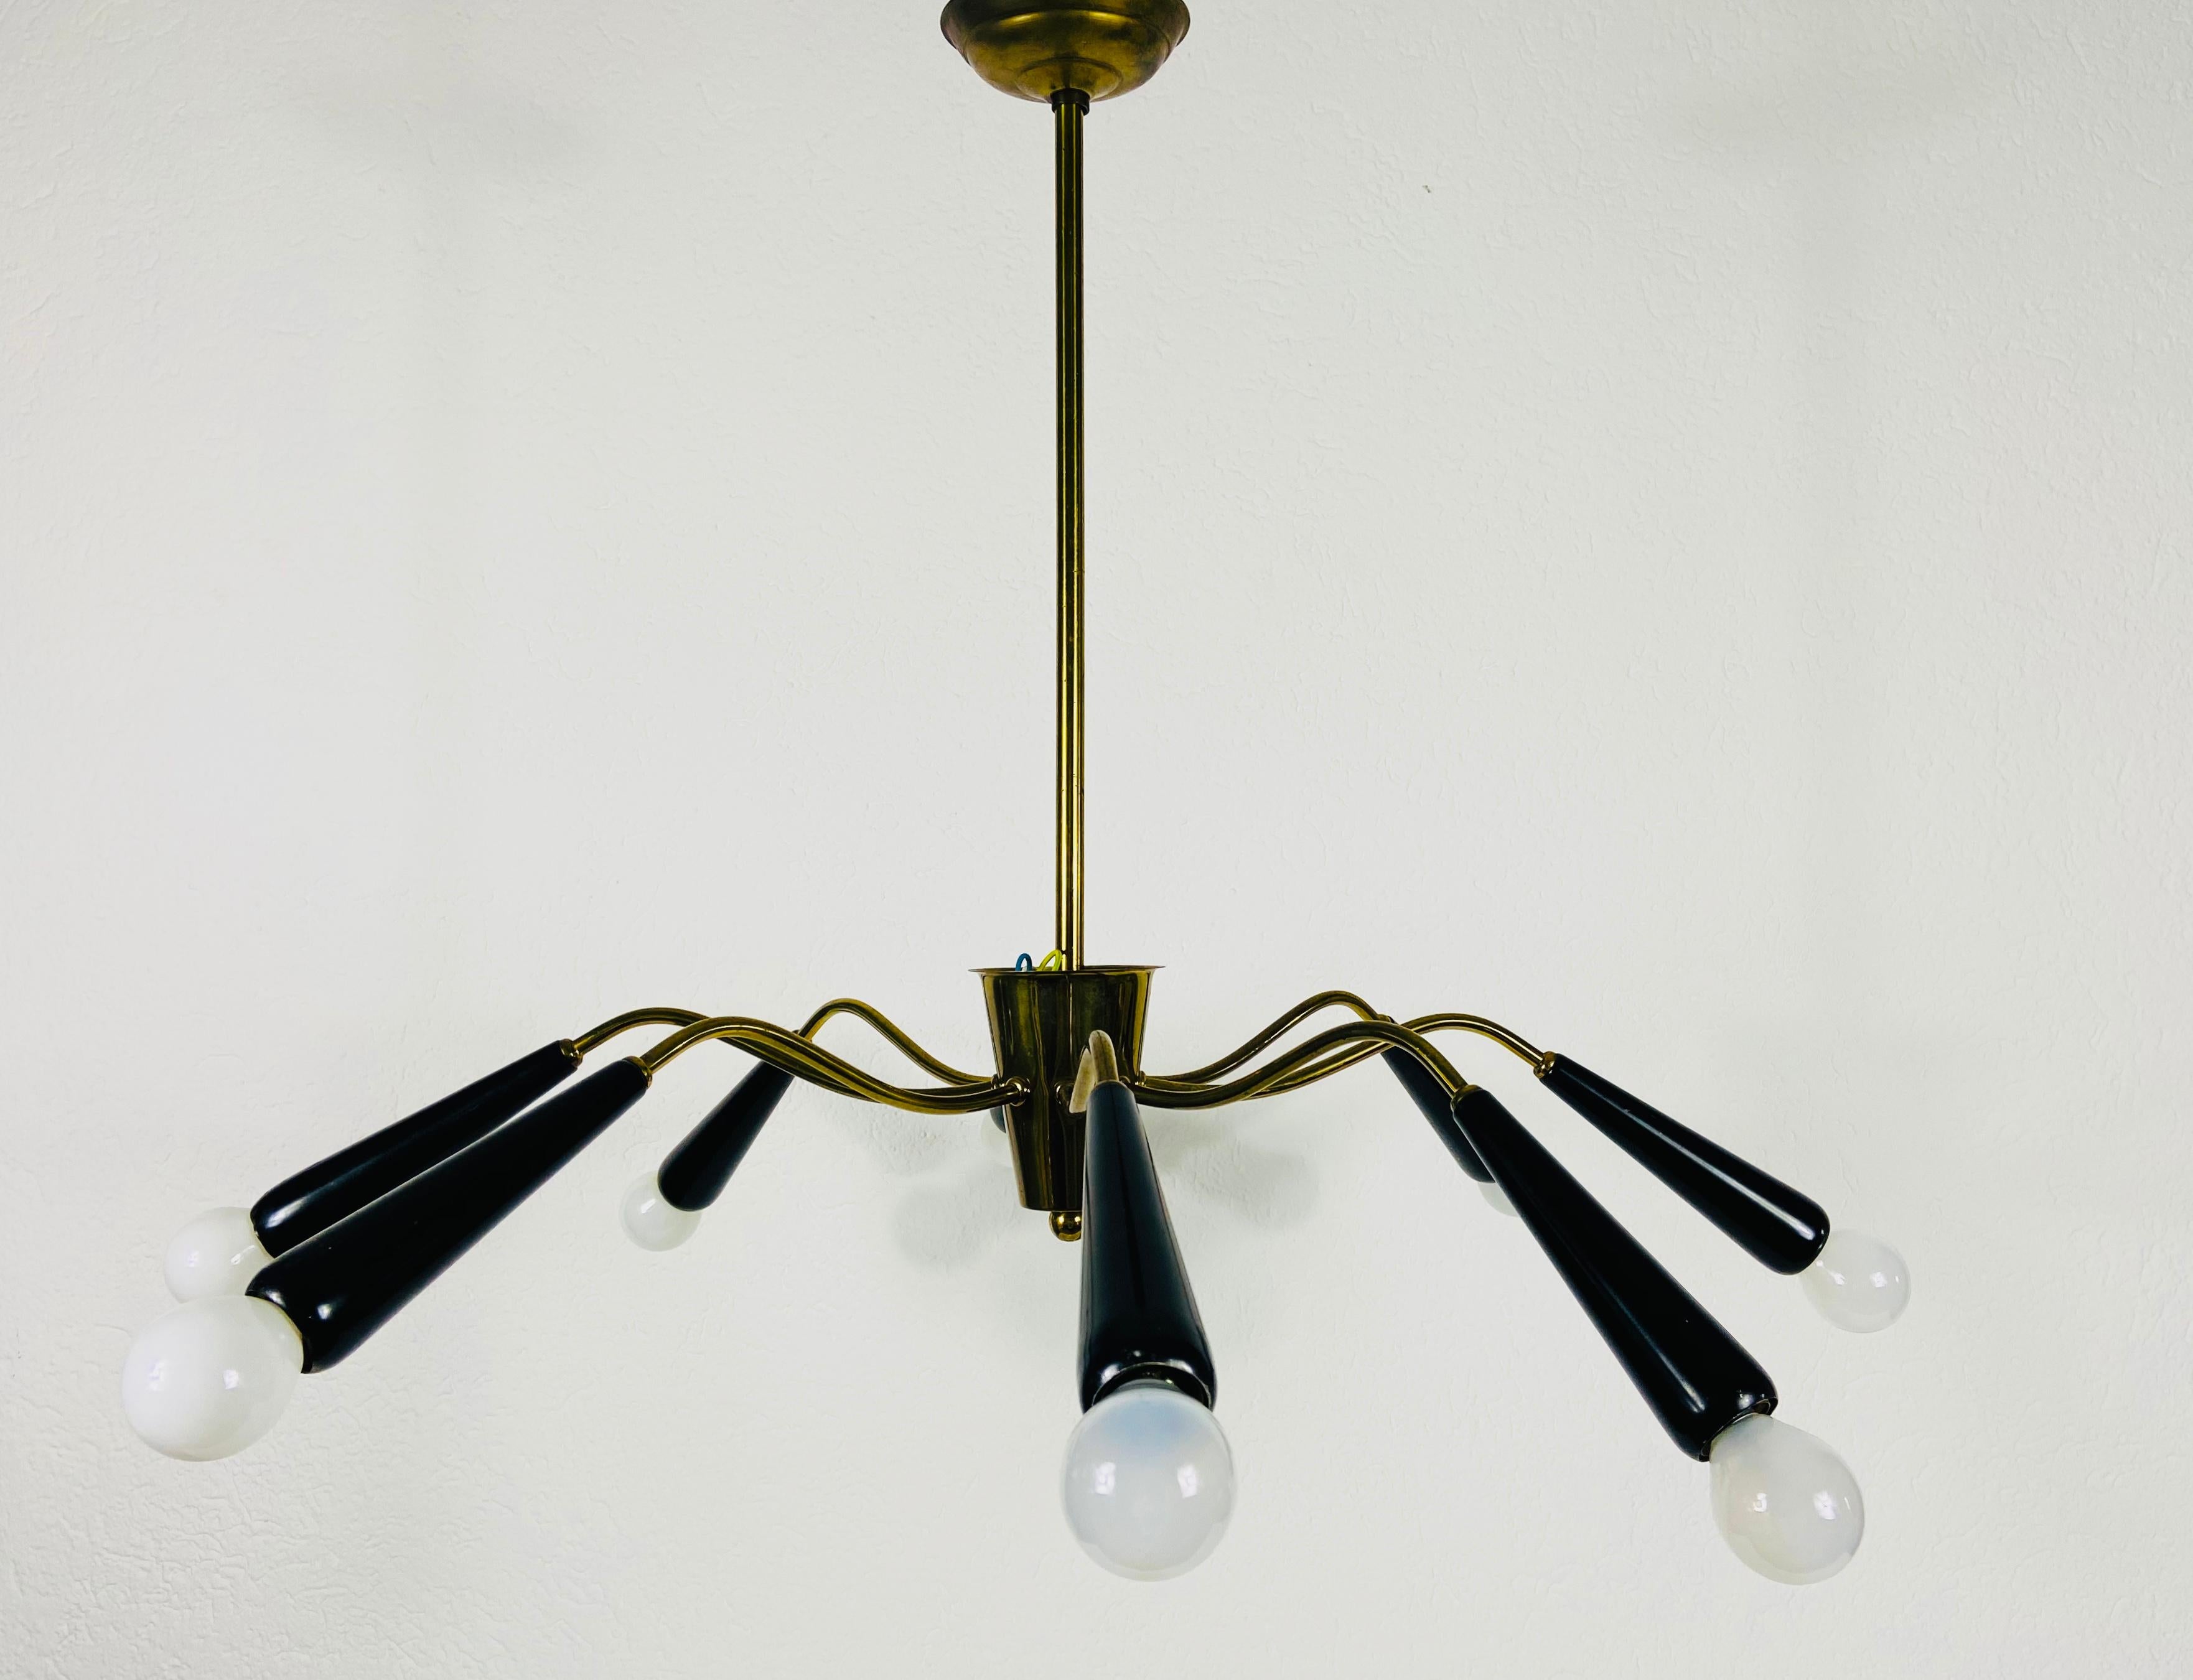 A Sputnik chandelier made in Italy in the 1950s. It is fascinating with its eight brass arms, each of it with an E14 light bulb. The shape of the light is similar to a spider.

The light requires 8 E14 light bulbs. Good vintage condition. Works